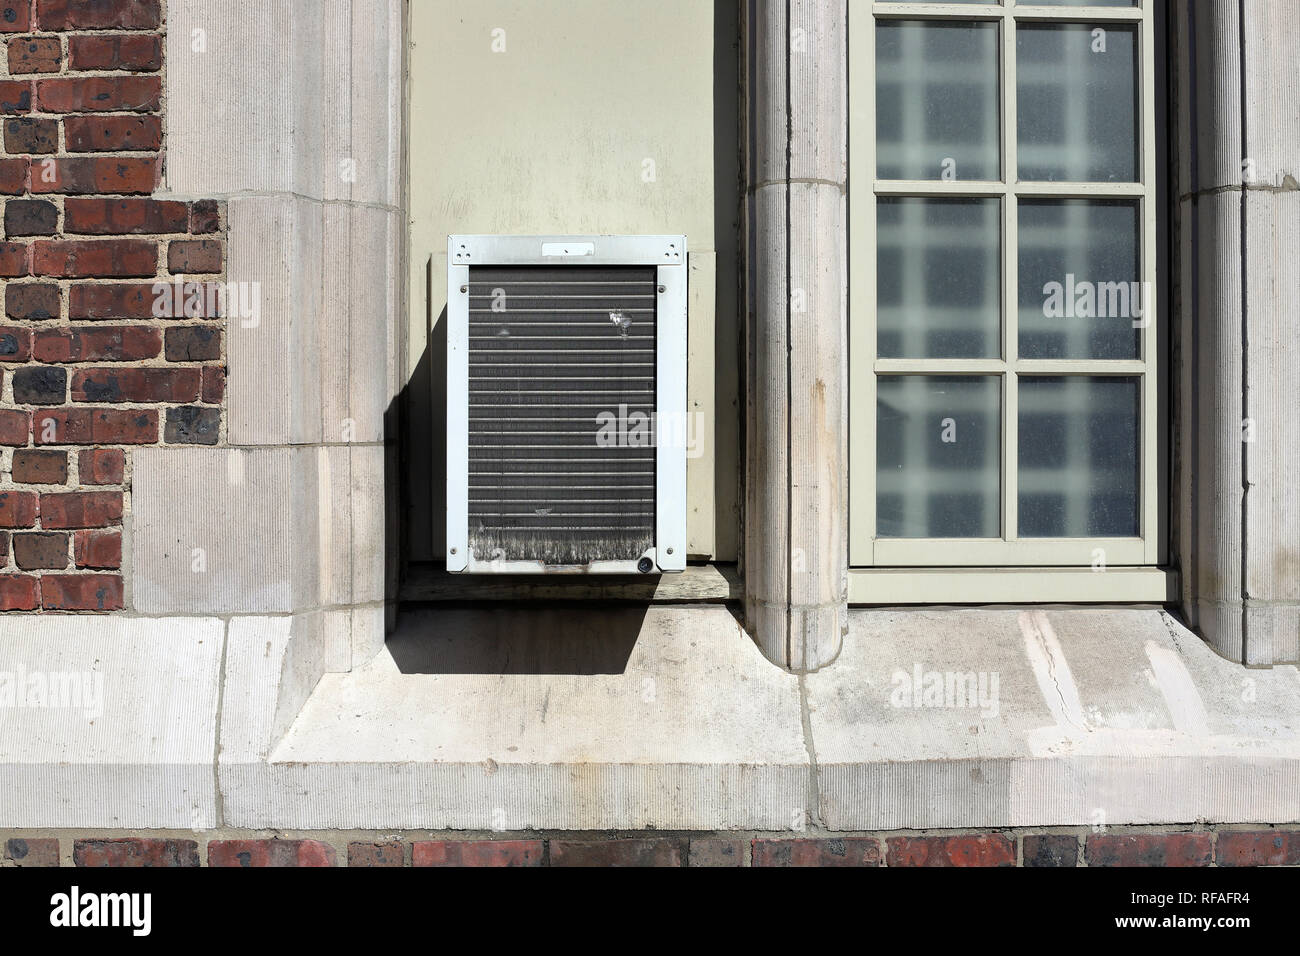 Window Air Conditioner unit on old brick building Stock Photo